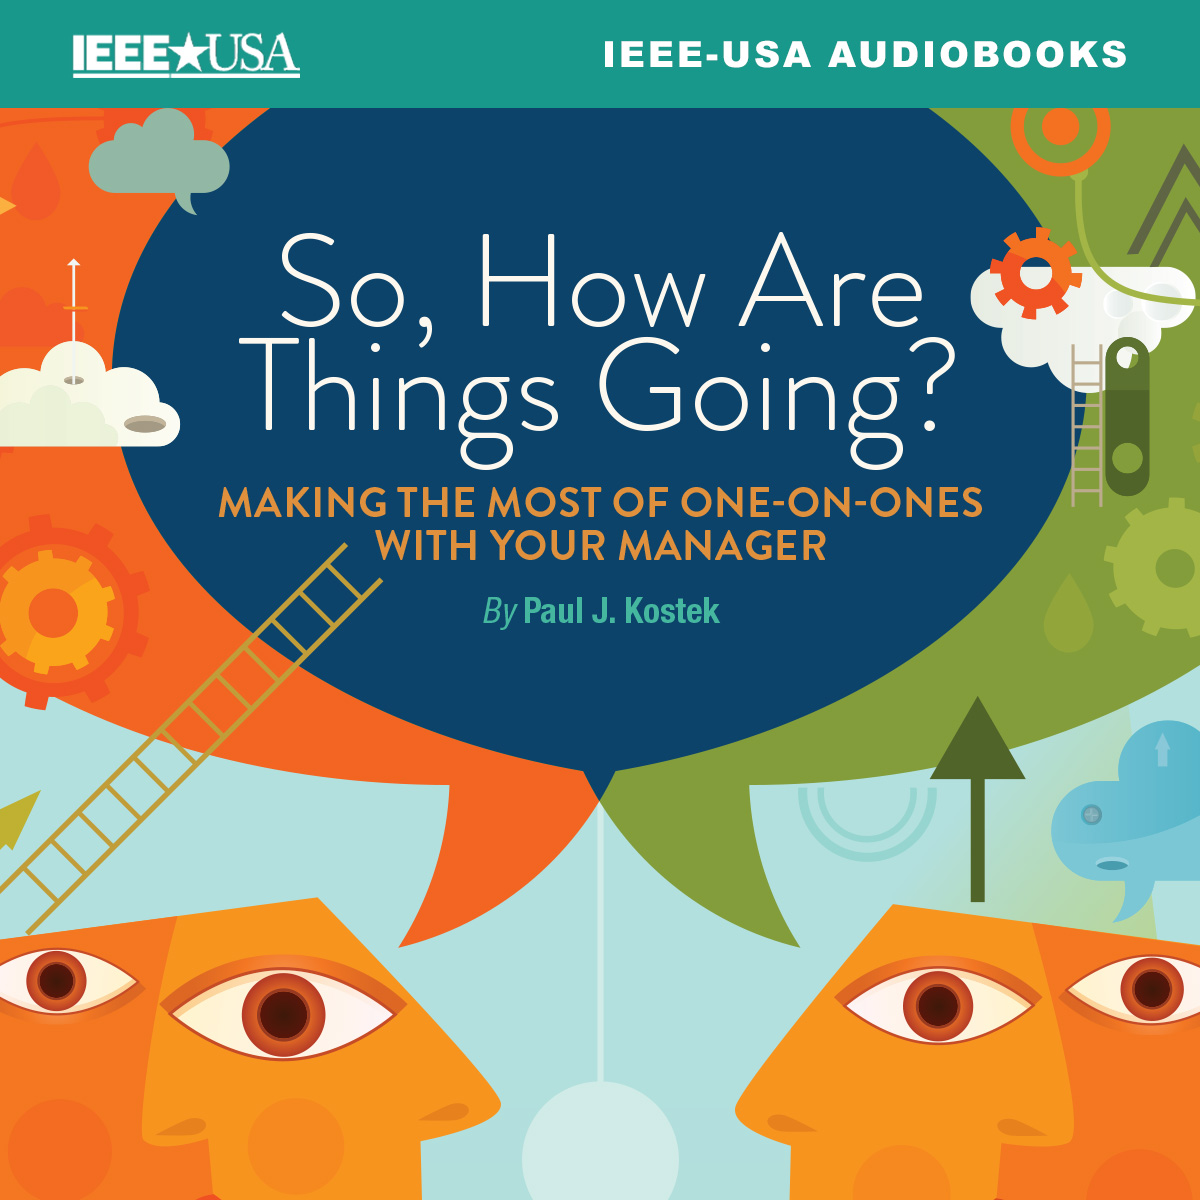 Audiobook: So, How Are Things Going? Making the Most of One-On-Ones With your Manager